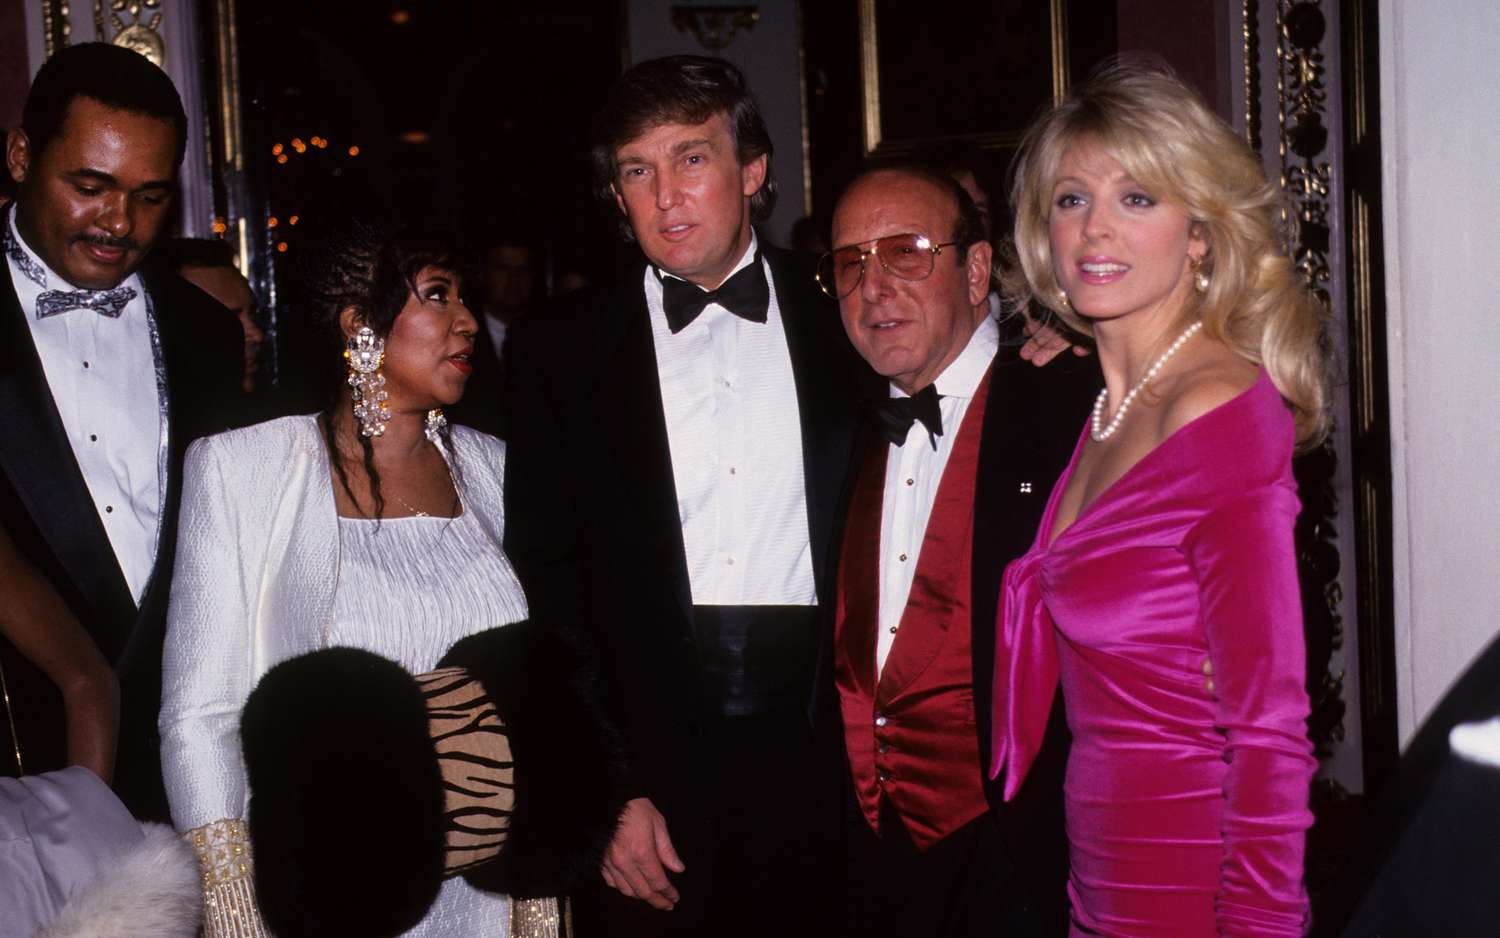 Aretha Franklin At A Grammy Party With Donald Trump, Clive Davis, and Marla Maples